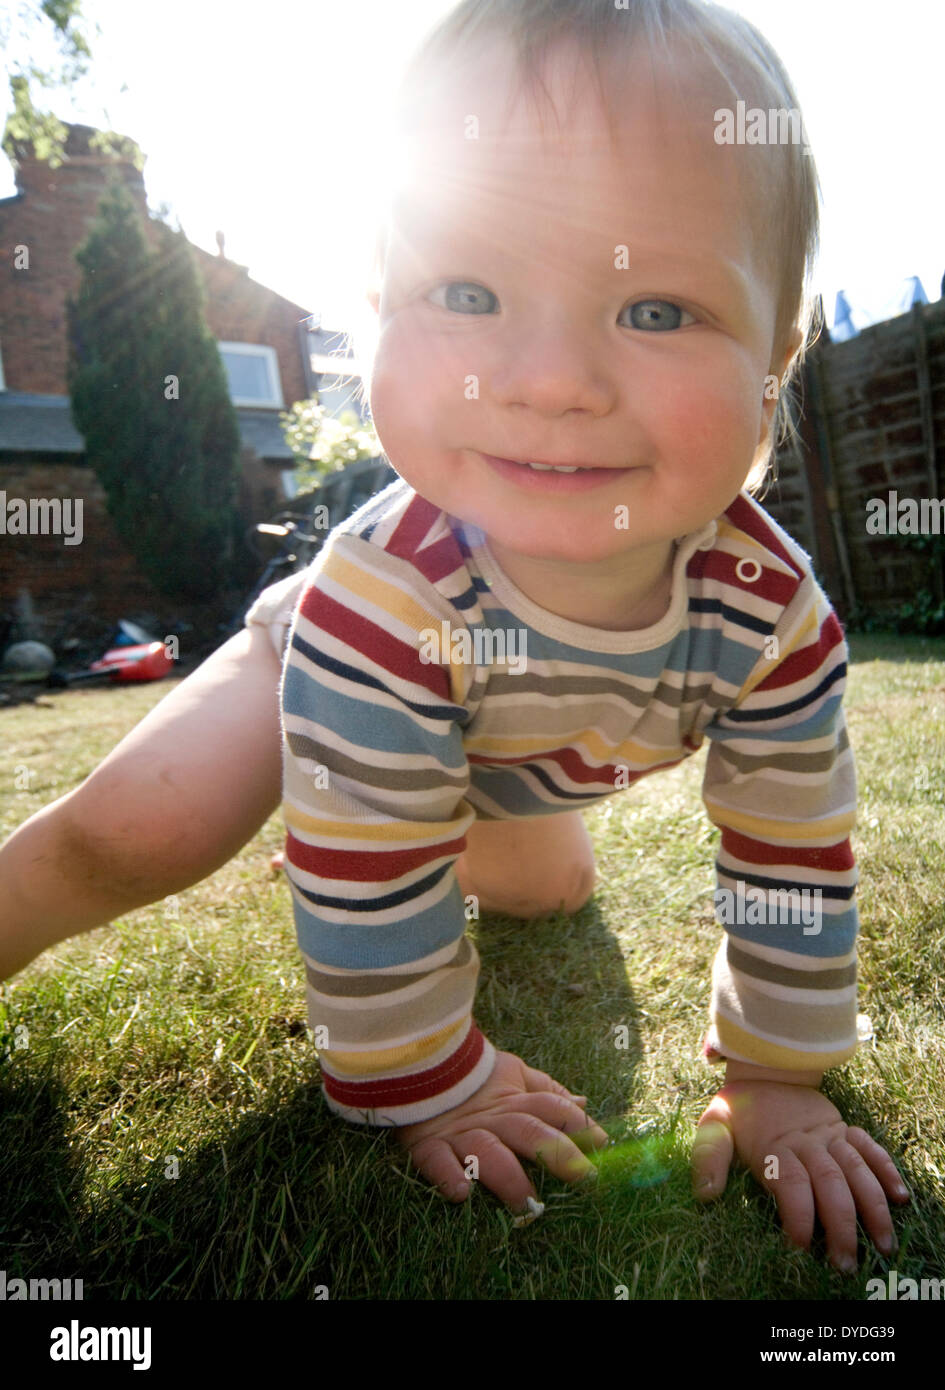 A small baby boy exploring crawling on the lawn in an english garden. Stock Photo